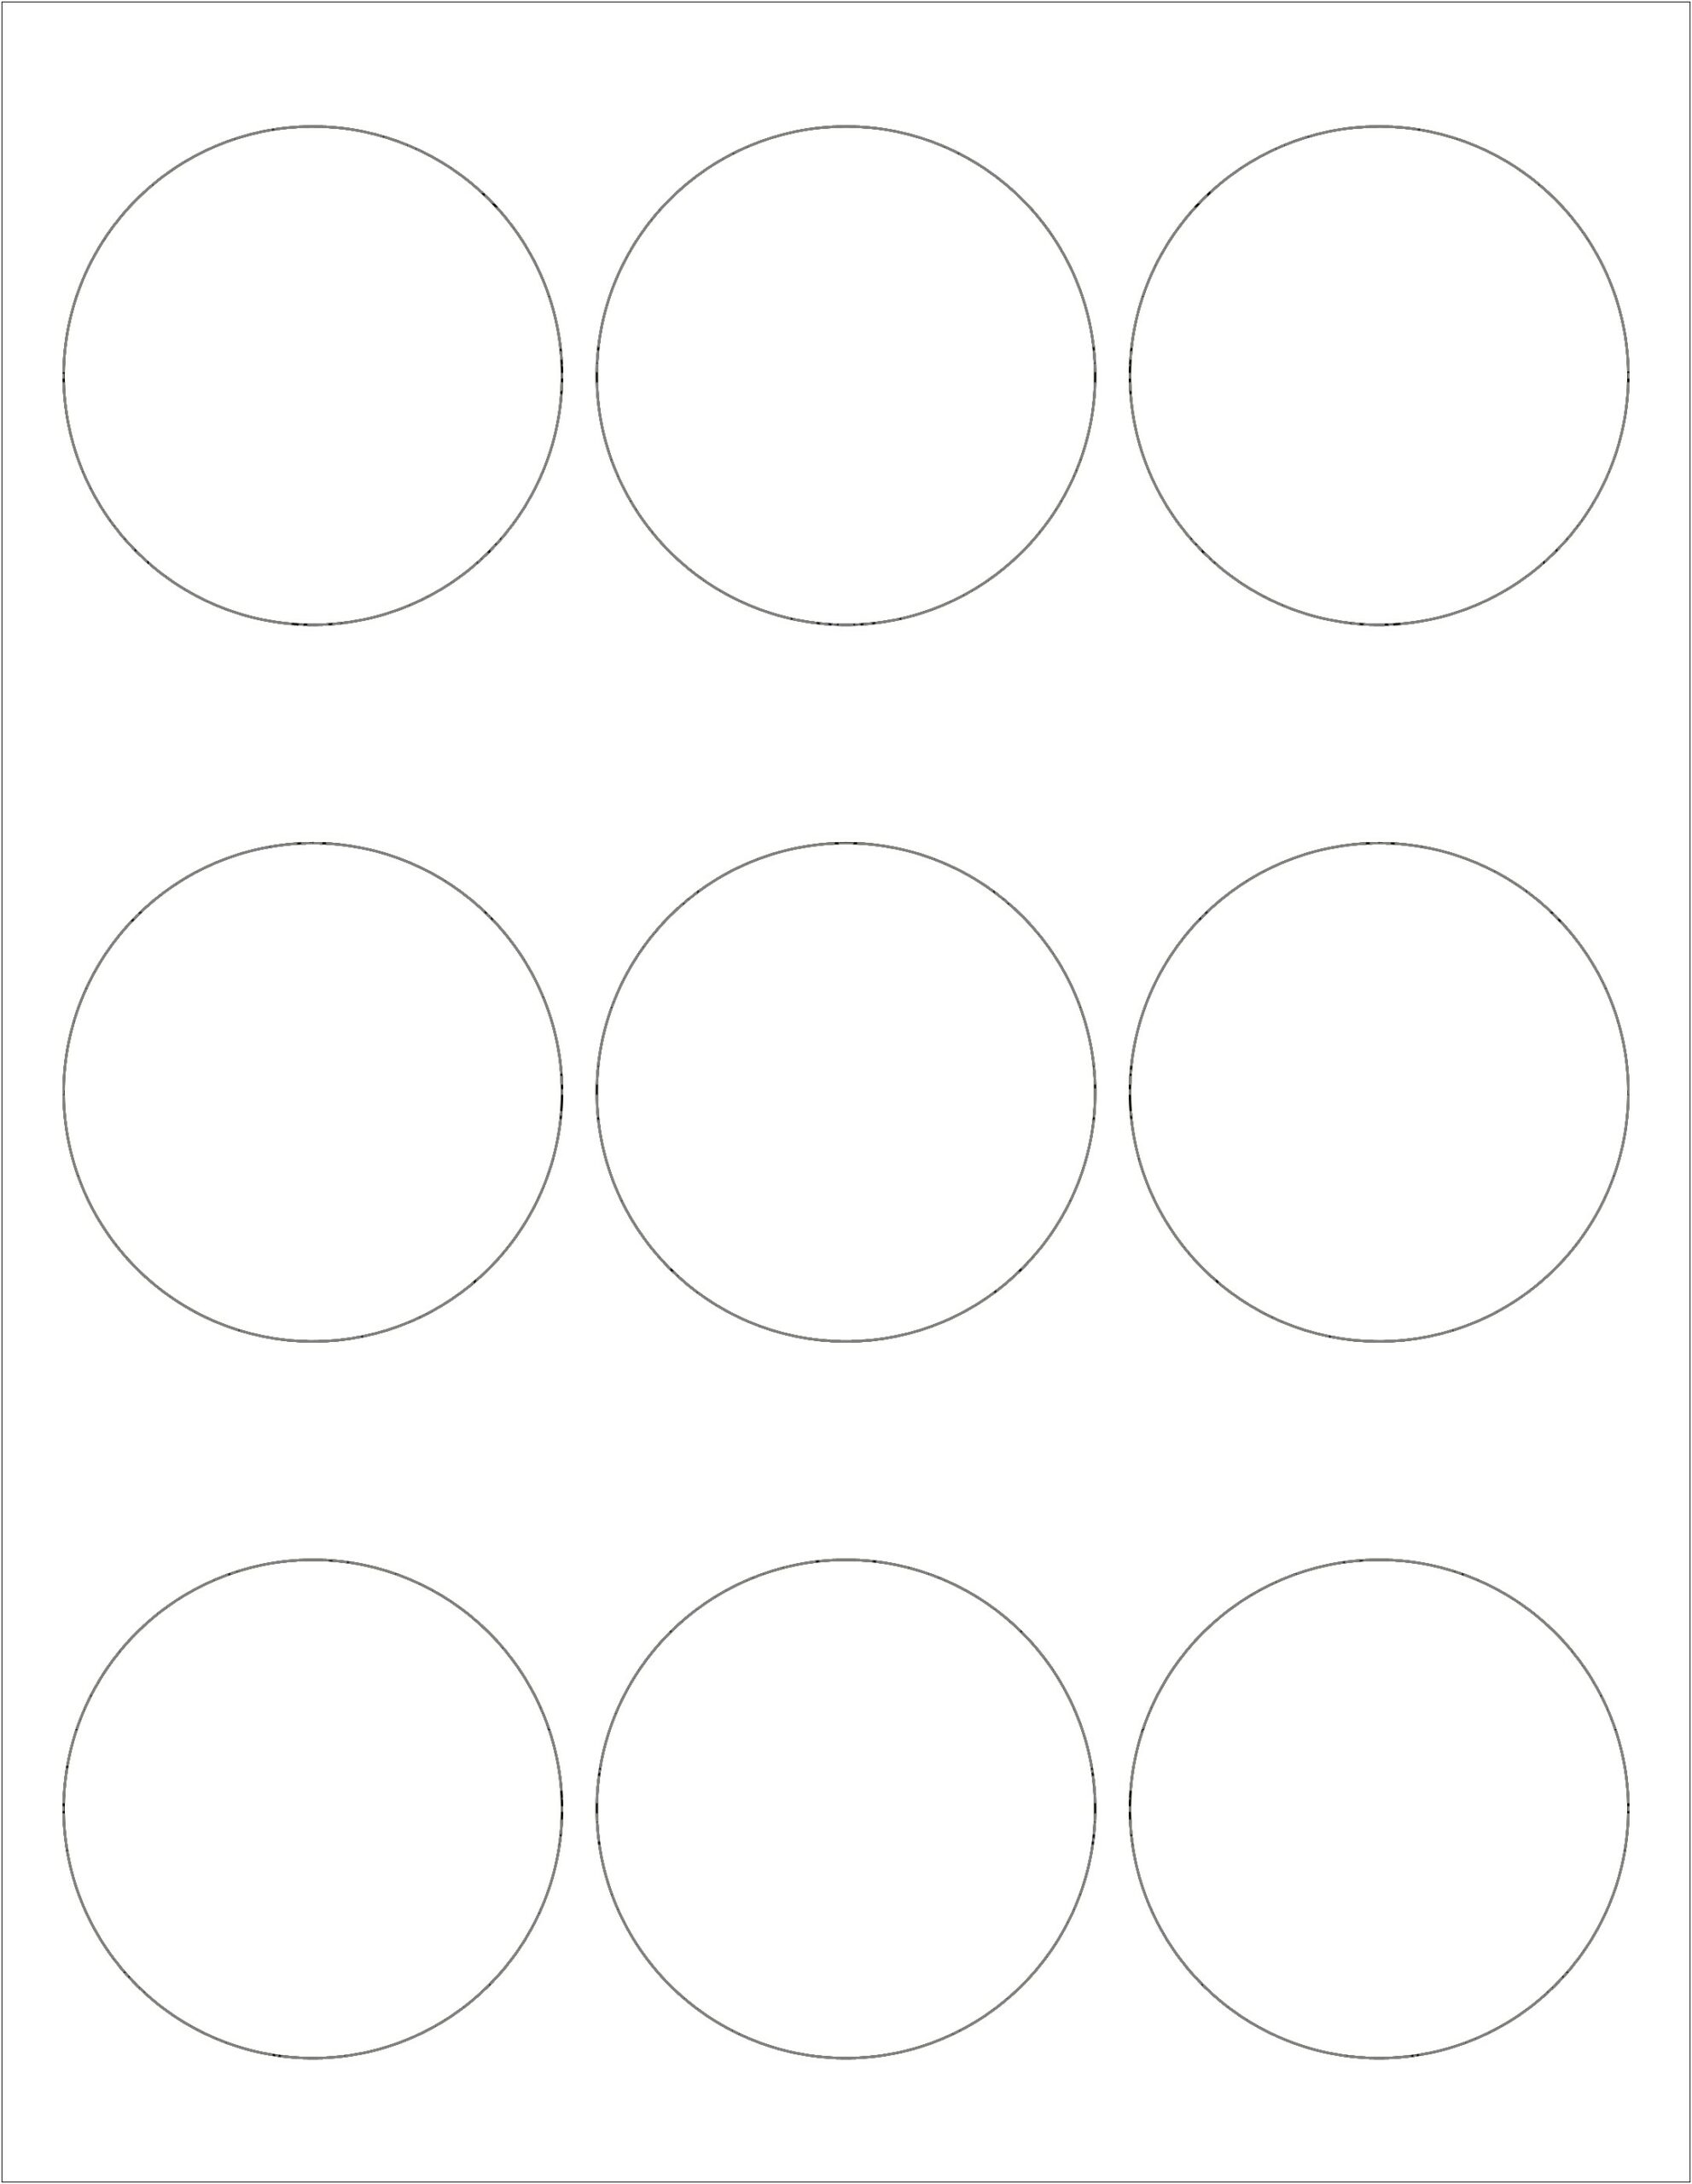 daily-circle-timen-template-free-printable-templates-resume-designs